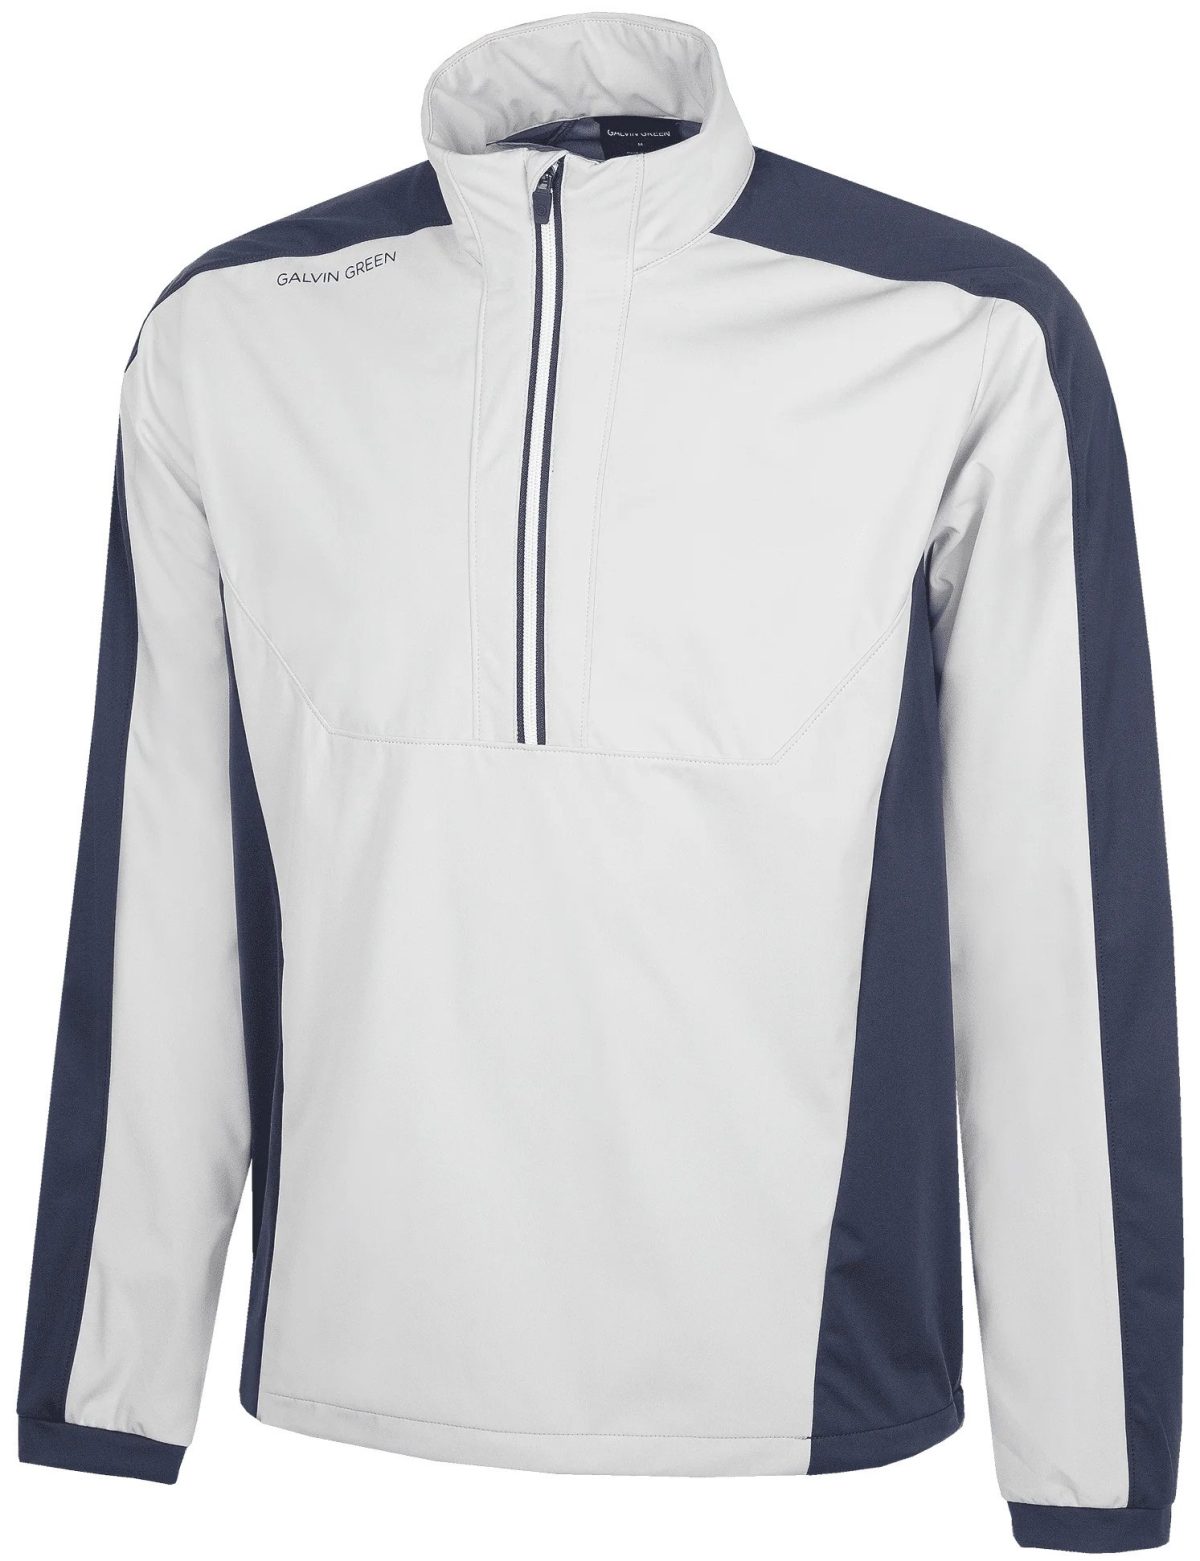 Galvin Green Men's Lawrence Golf Pullover, 100% Recycled Polyester in Cool Grey/Navy/White, Size M